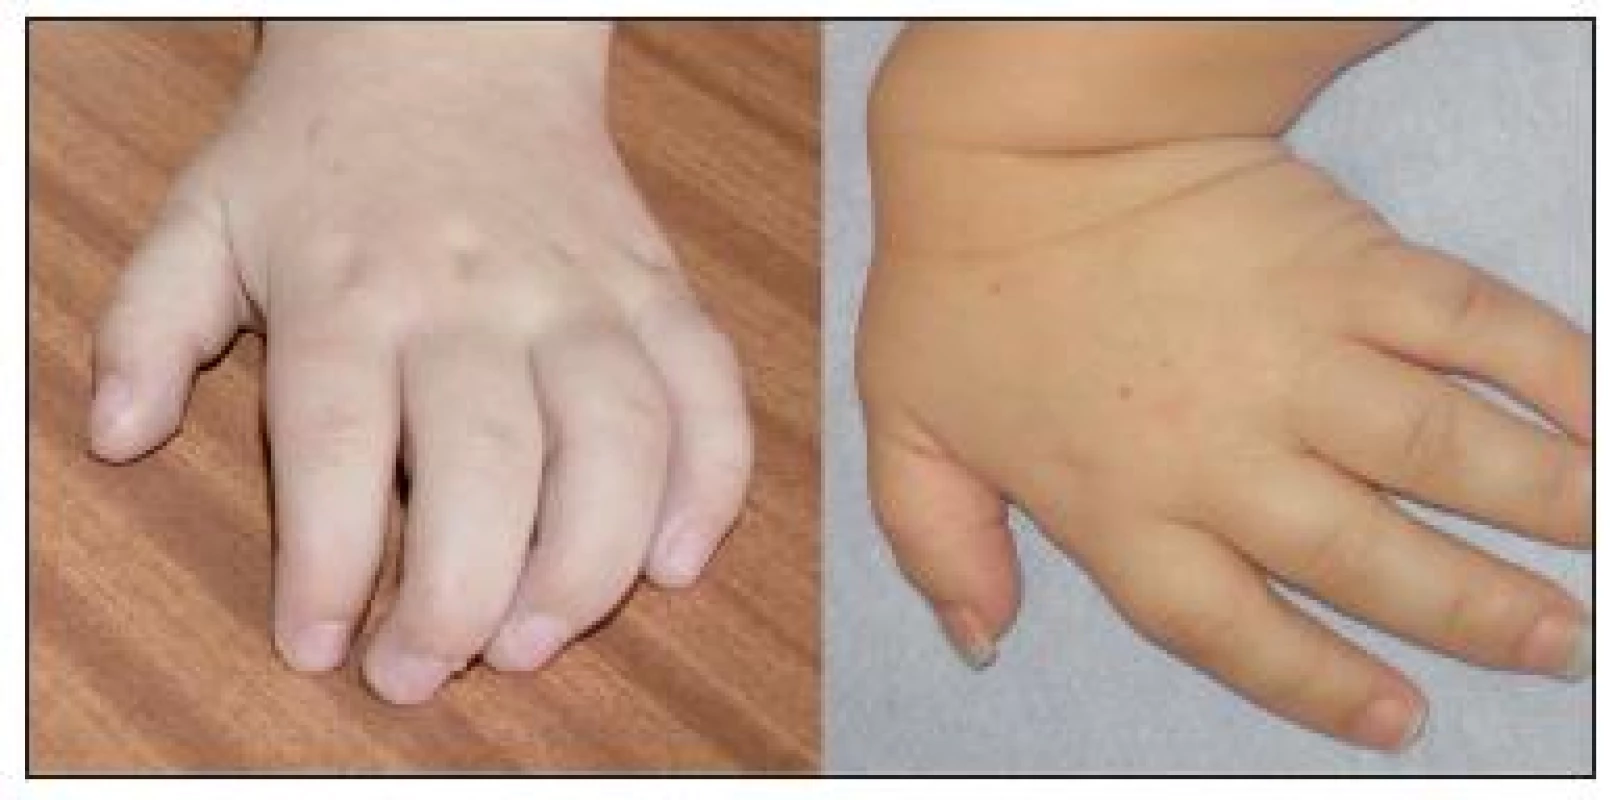 Vlevo – typická „drápovitá“ ruka u pacienta s MPS I. Vpravo – hypermobilita a hypotonie ruky u pacienta s MPS IV.
Fig. 3. On the left is the typical “clawlike hand” in a patient with MPS I. On the right there is hypermobility and hypotonia of the hand in a patient with MPS IV.